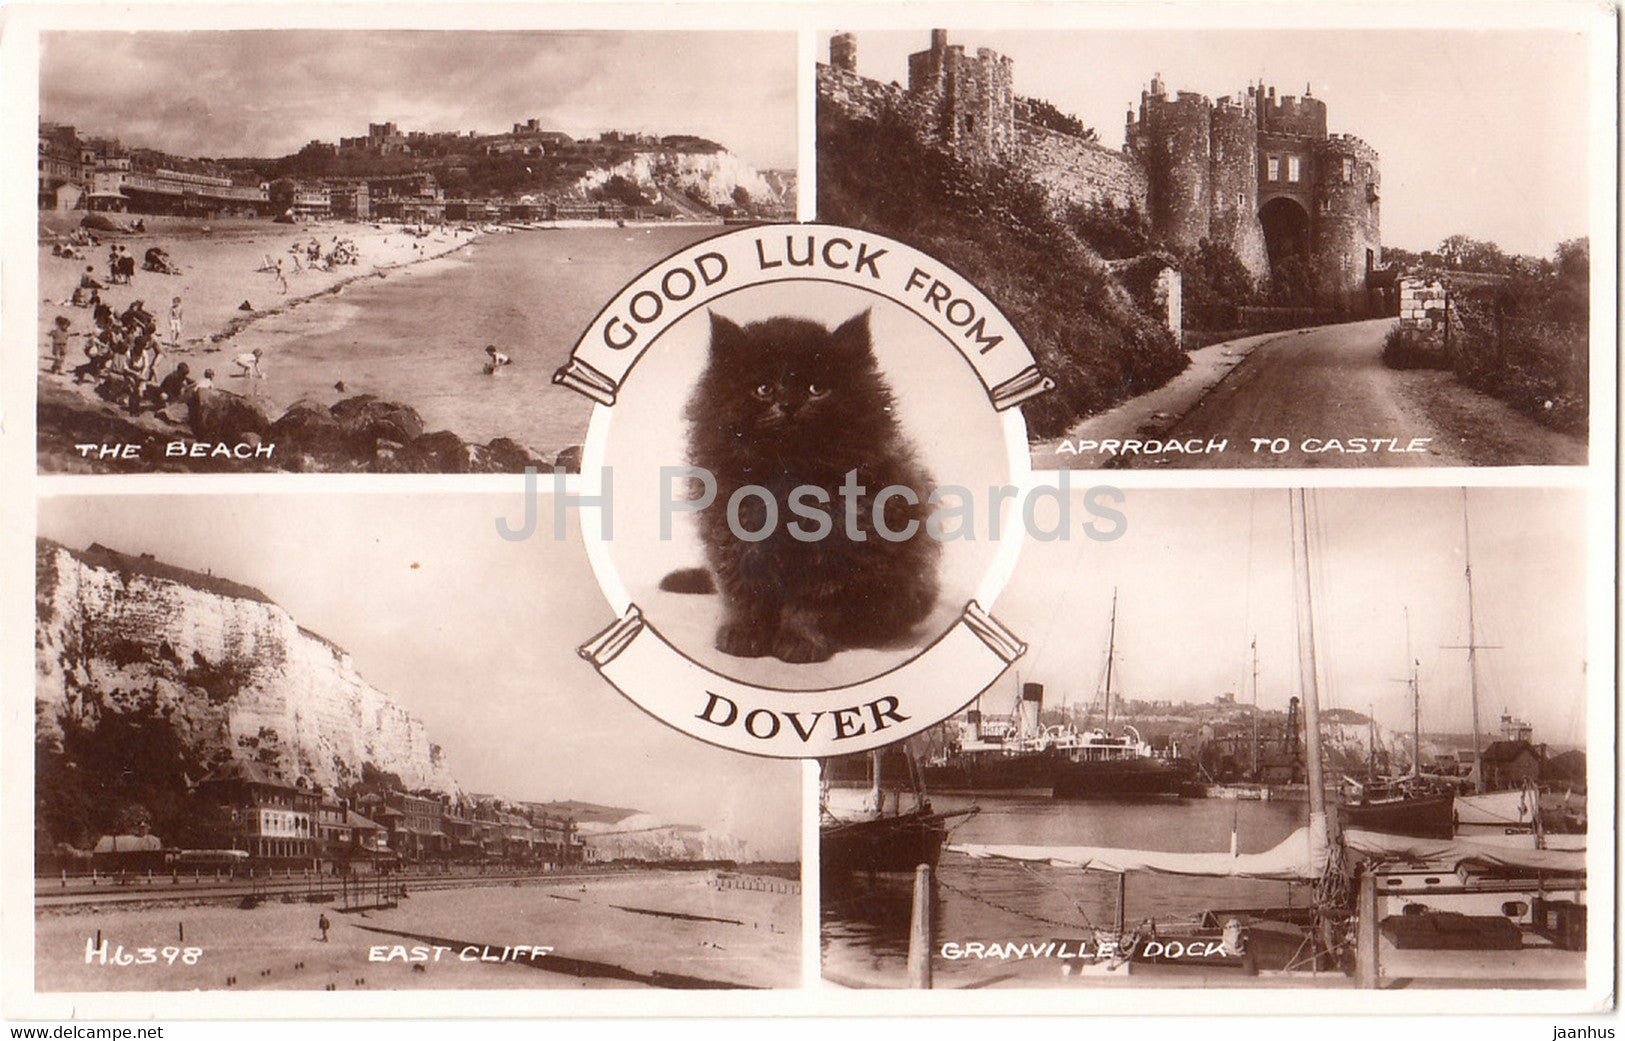 Good Luck from Dover - beach - East Cliff - castle - Granville Dock - cat - United Kingdom - 1953 - England - used - JH Postcards